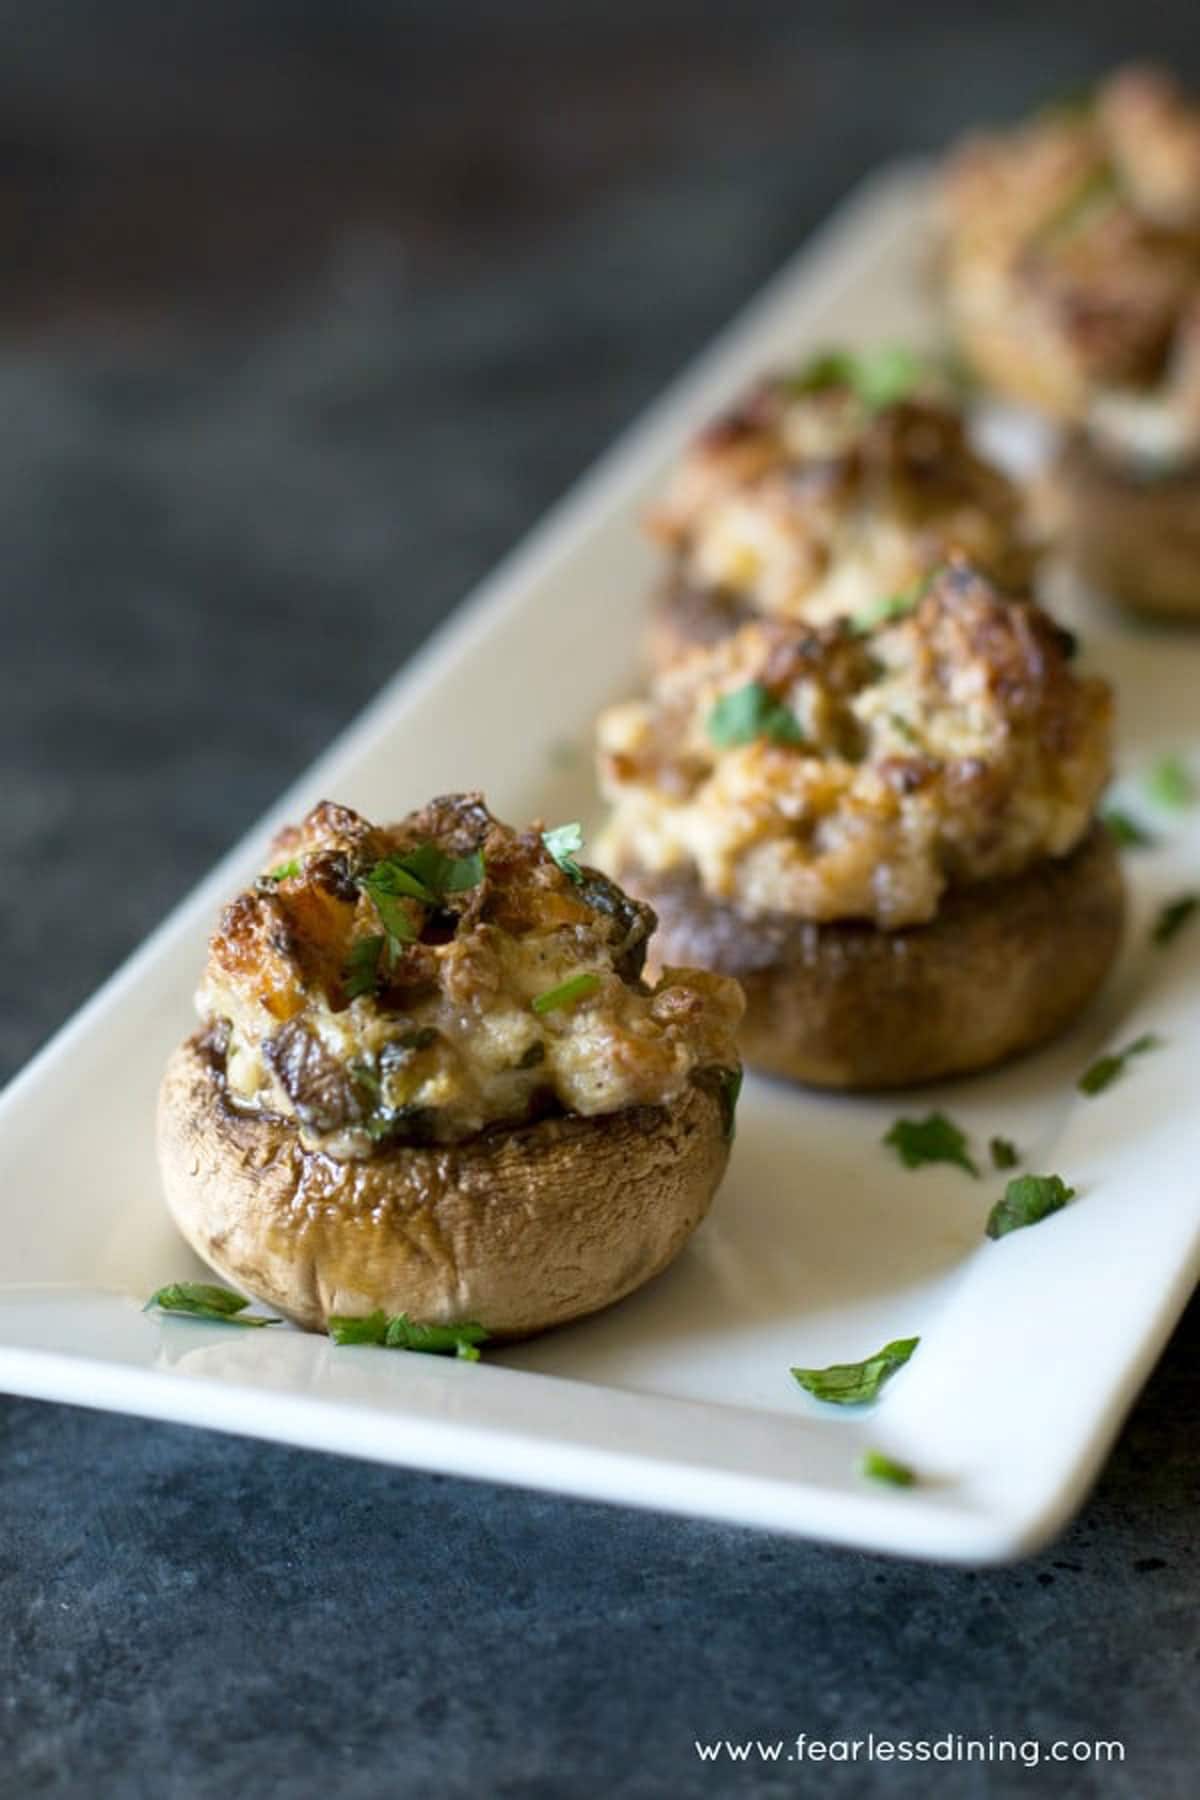 A serving dish with stuffed mushrooms lined up.